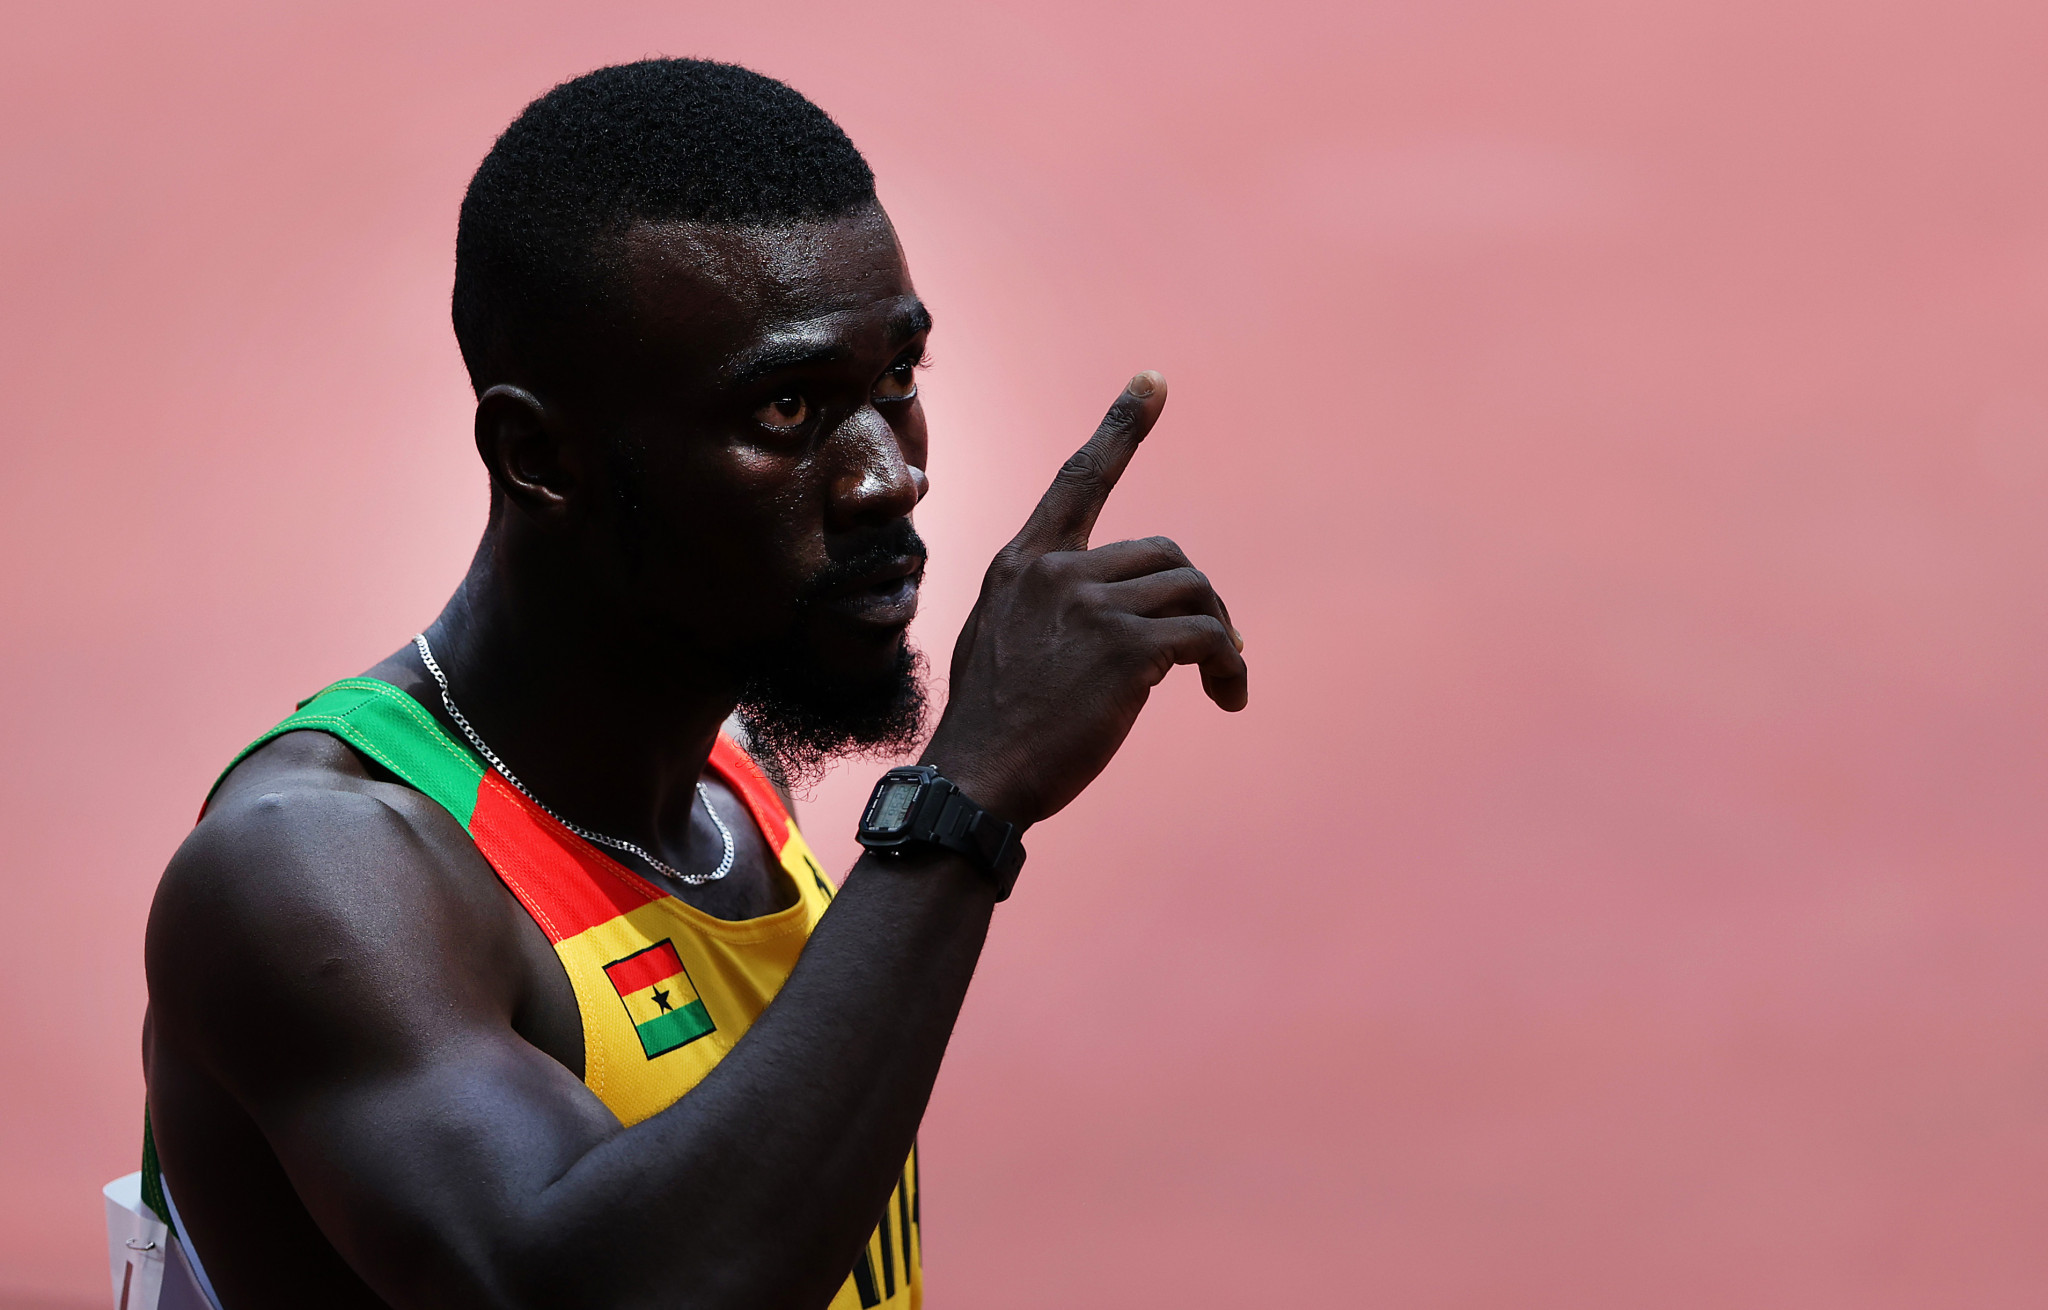  Joseph Amoah reached the Tokyo 2020 semi-finals in the 200 metres ©Getty Images